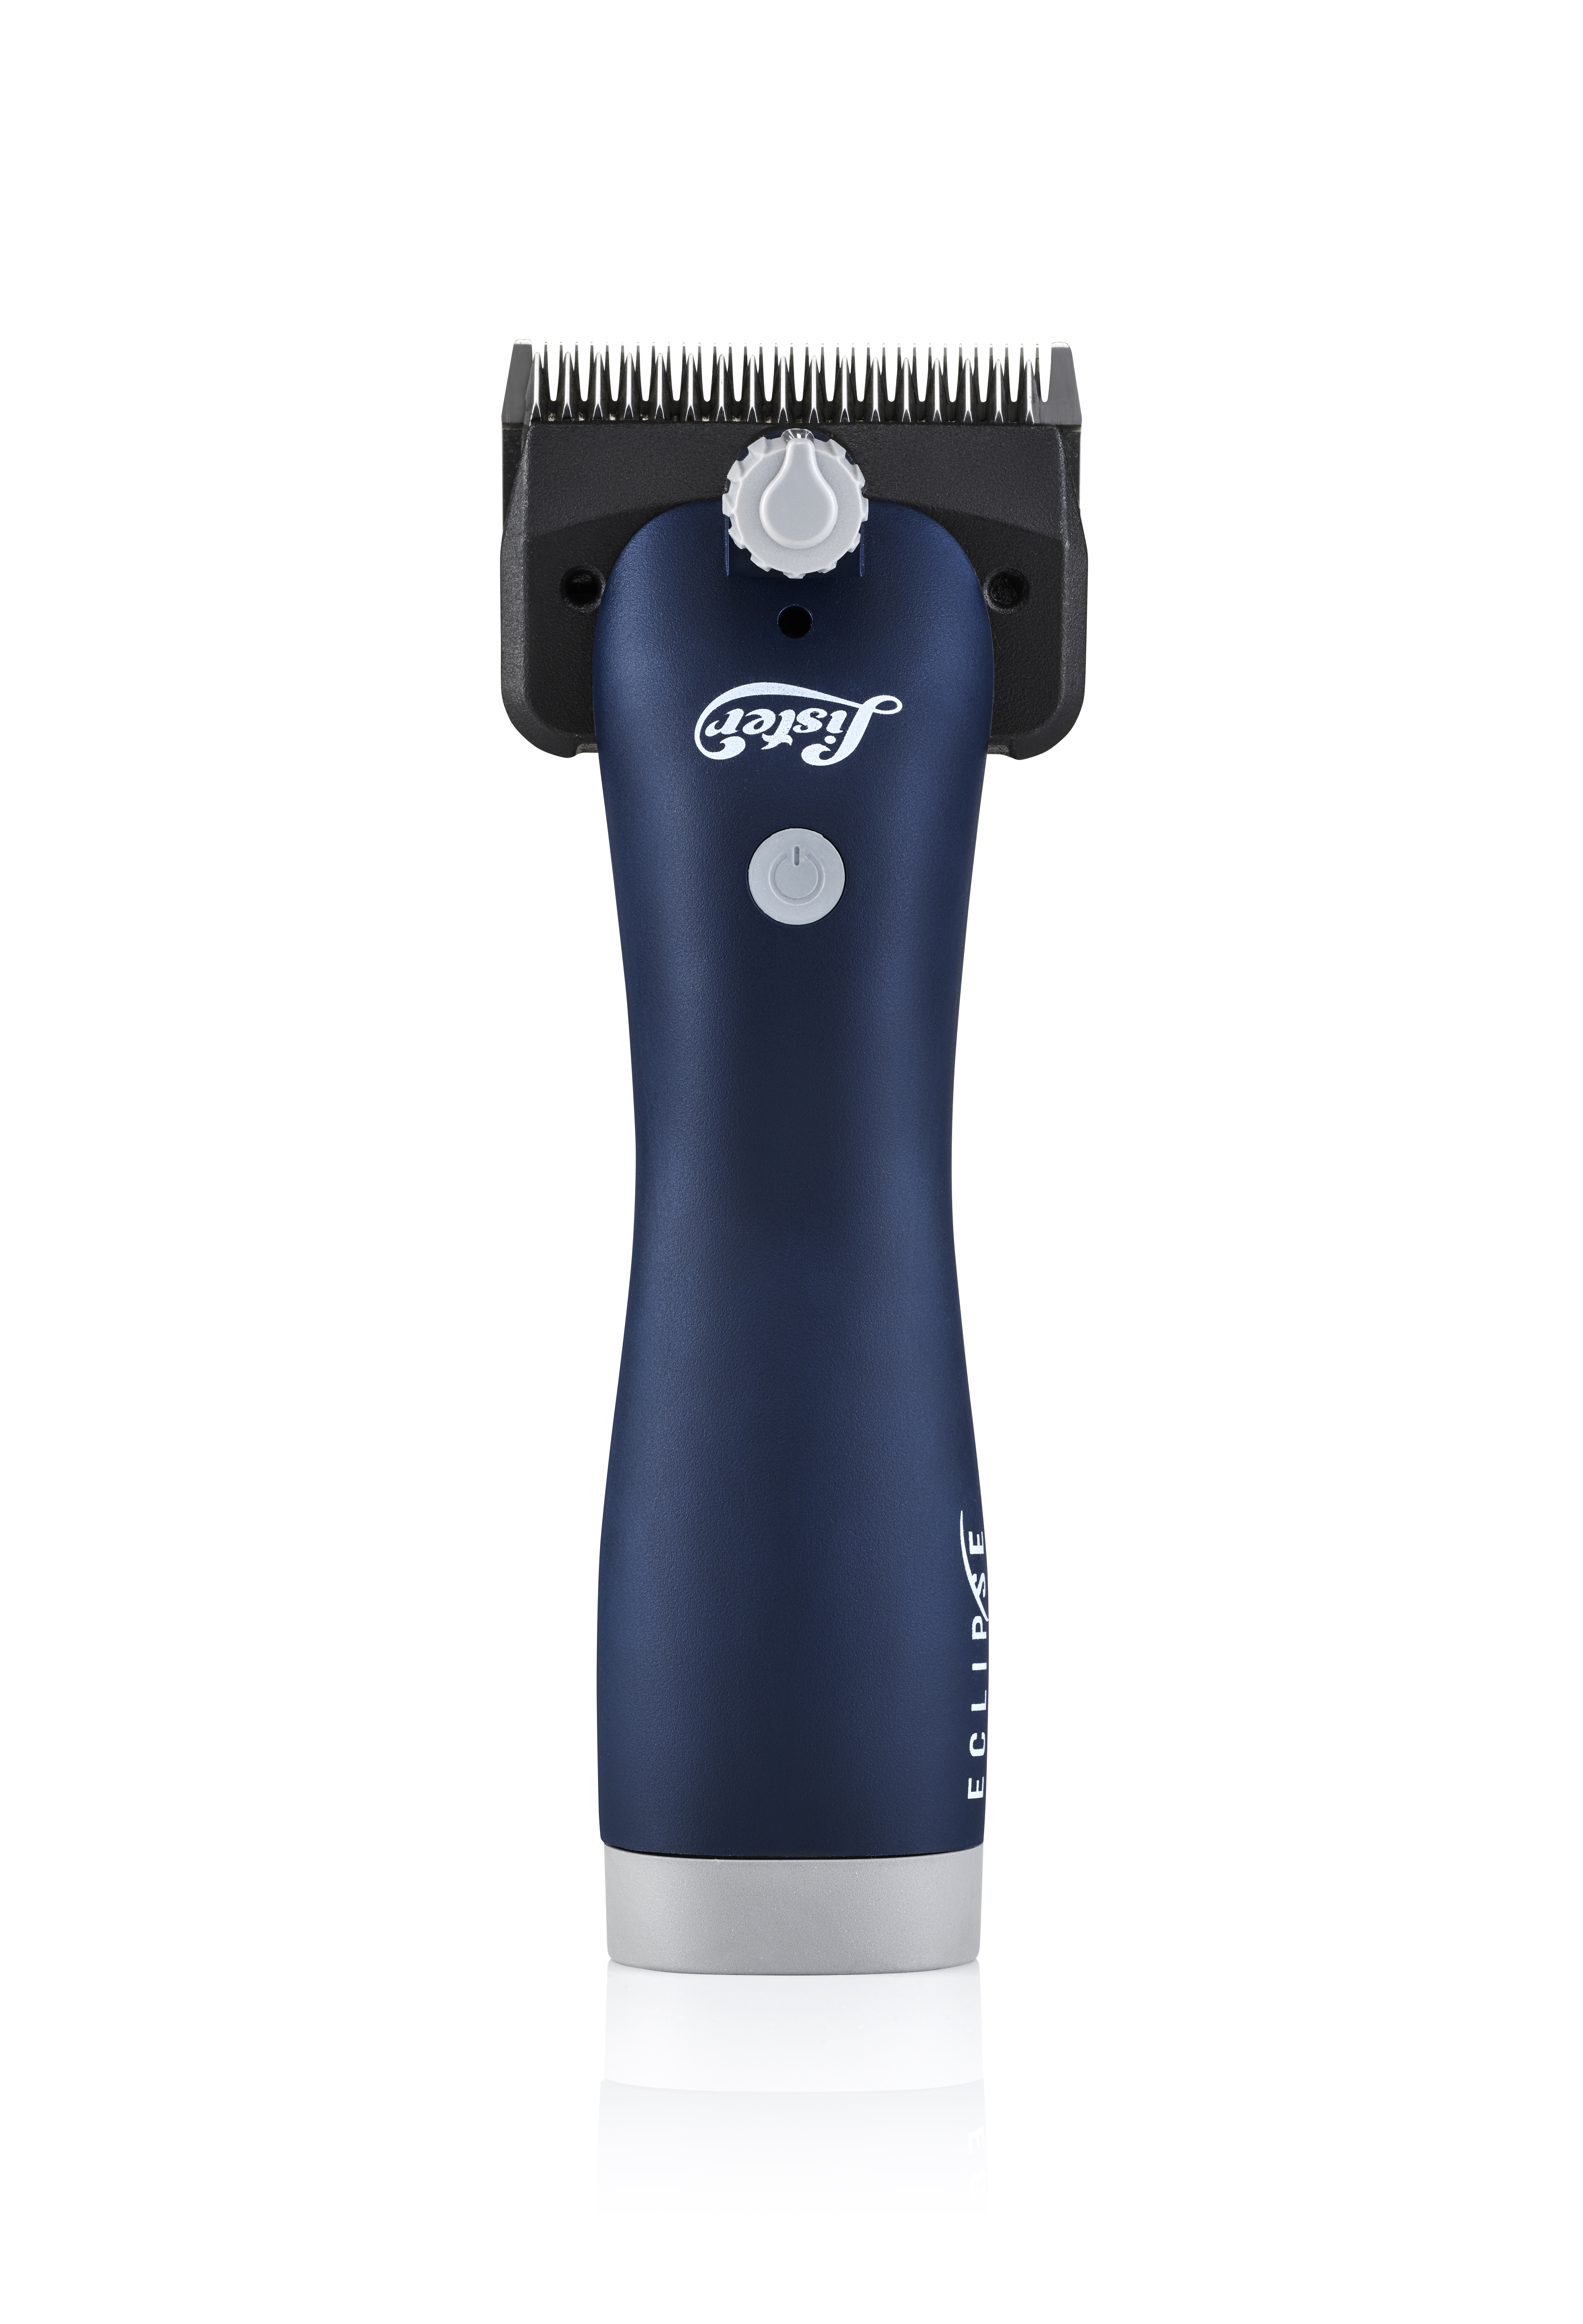 Lister Eclipse or Heiniger Xplorer - which cordless horse clipper is best?